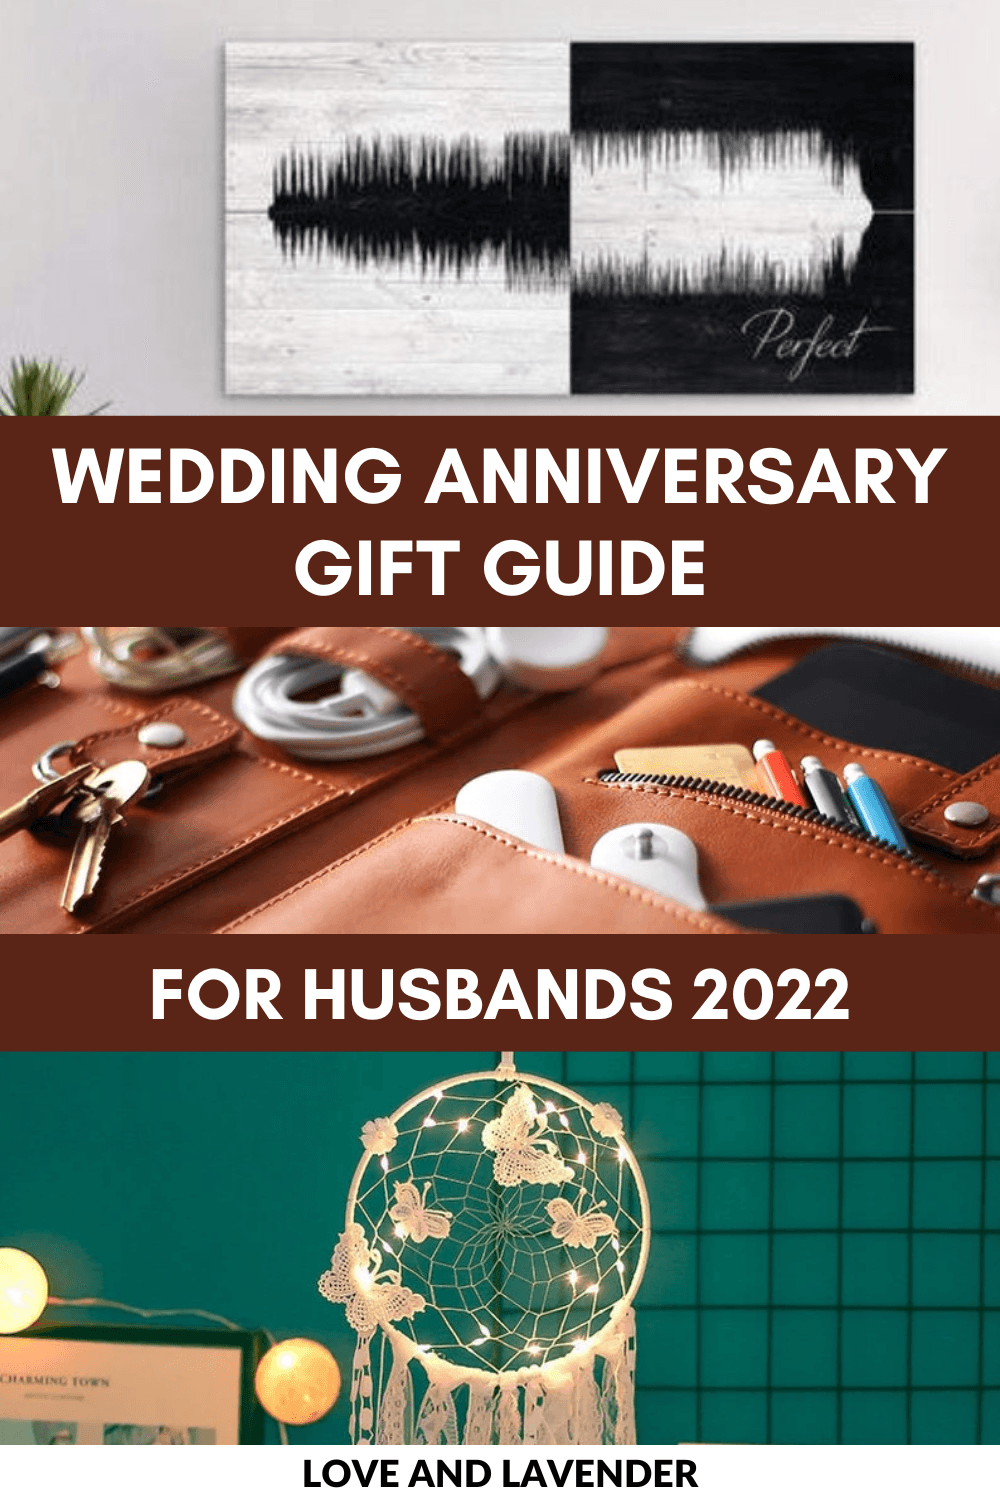 20 Thoughtful Anniversary Gift Ideas for Him